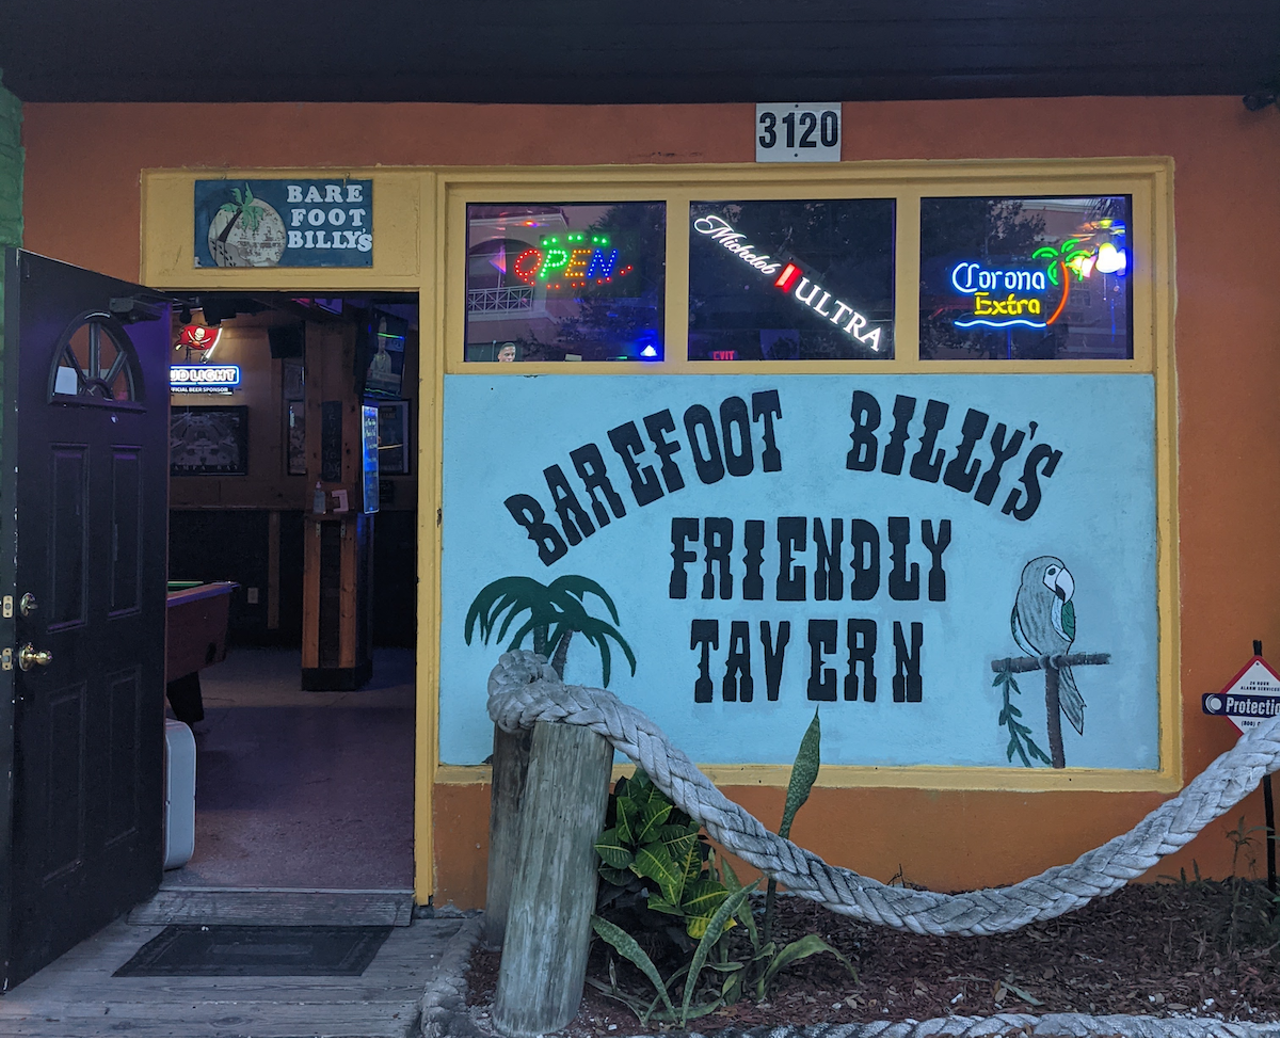 Barefoot Billy’s Friendly Tavern 
3120 W Gandy Blvd., Tampa, 813-831-8703
If you’re not careful you may drive right past the parking lot of this South Tampa watering hole on Gandy Blvd. From the street you’ll notice the outside of the bar is painted with tropical scenes of palm trees and a setting sun, but once inside you’ll find a dimly lit space with wood paneled walls and TVs to watch your favorite teams. While they offer beer and wine only, they do have flavored jello shots, which were deemed “strong as hell” by the bartender. A large patio area out back has plenty of picnic tables where you can enjoy your beer with your furry friend.
Photo by Jourdan Ducat